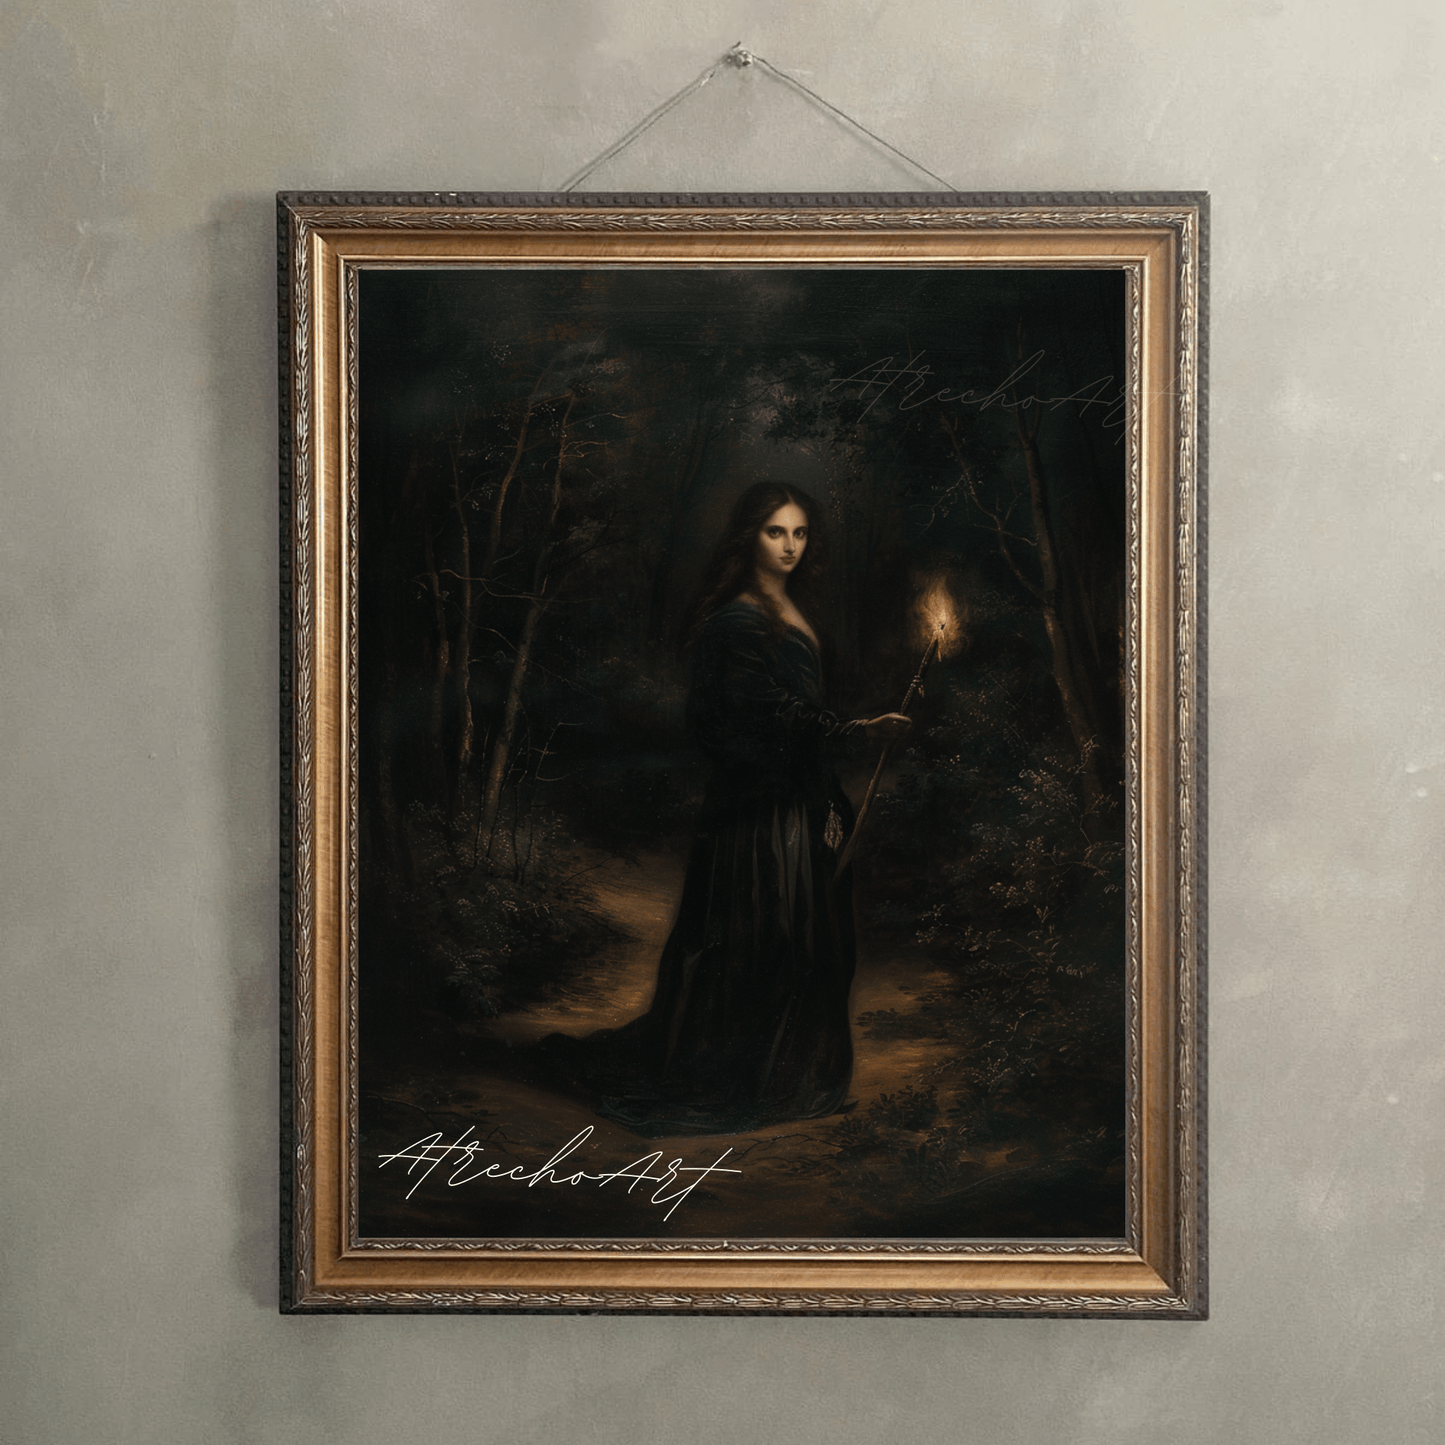 FOREST WITCH | Printed Artwork | WH12